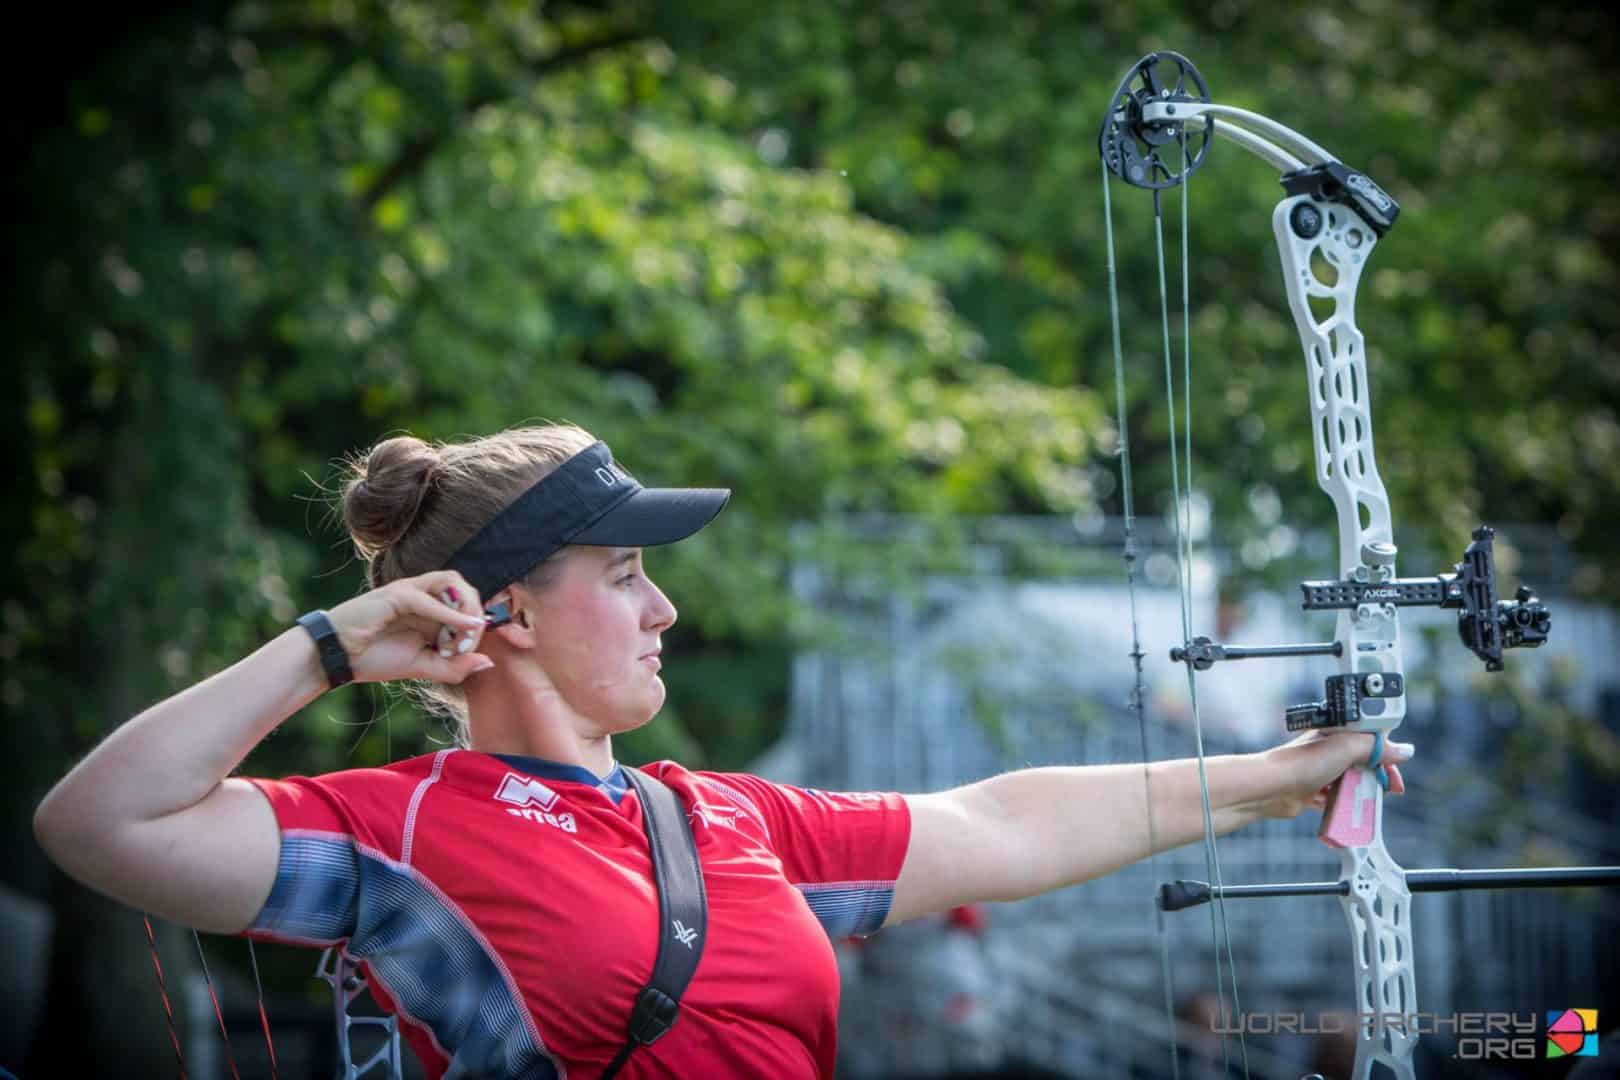 Archery training for the festive season: Para squad archer Phoebe Pine shares her training tips